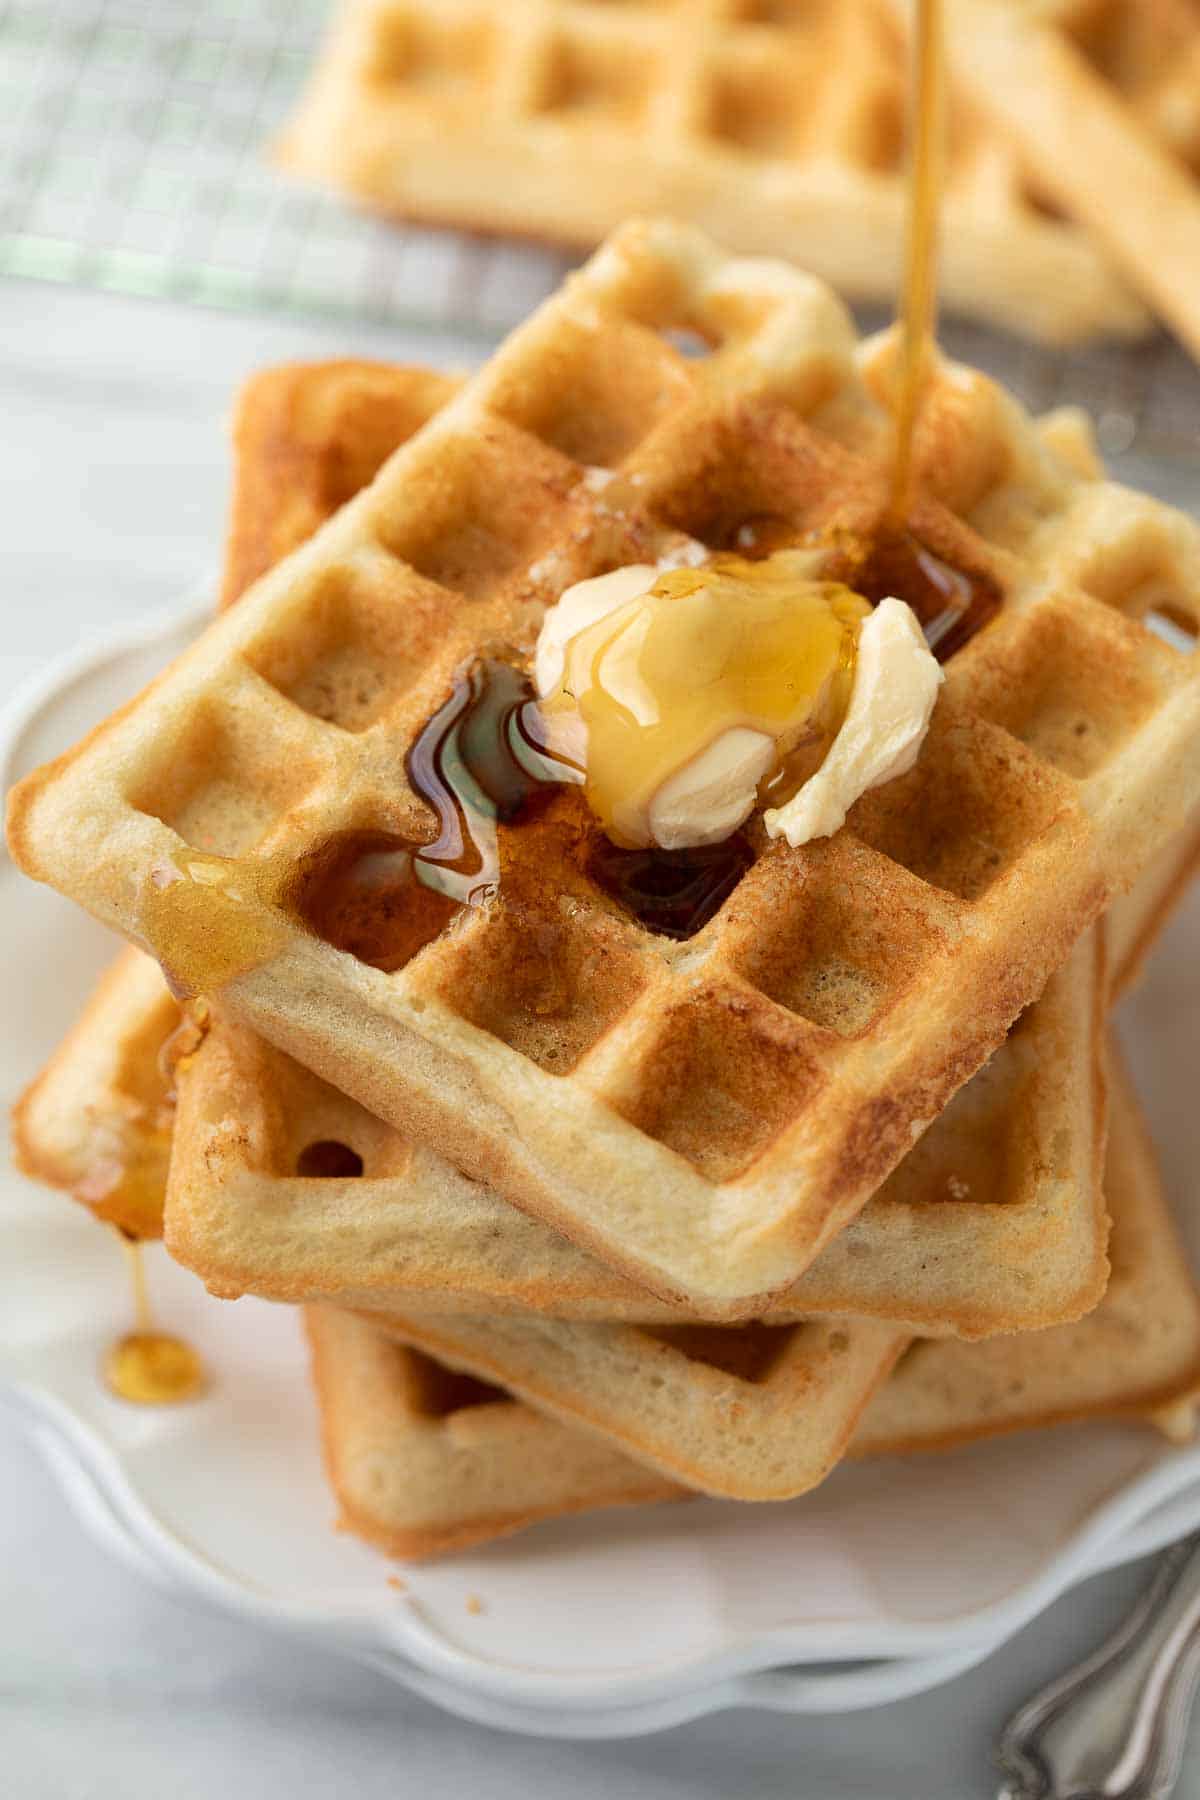 gluten free waffles on white plate with syrup being drizzled over